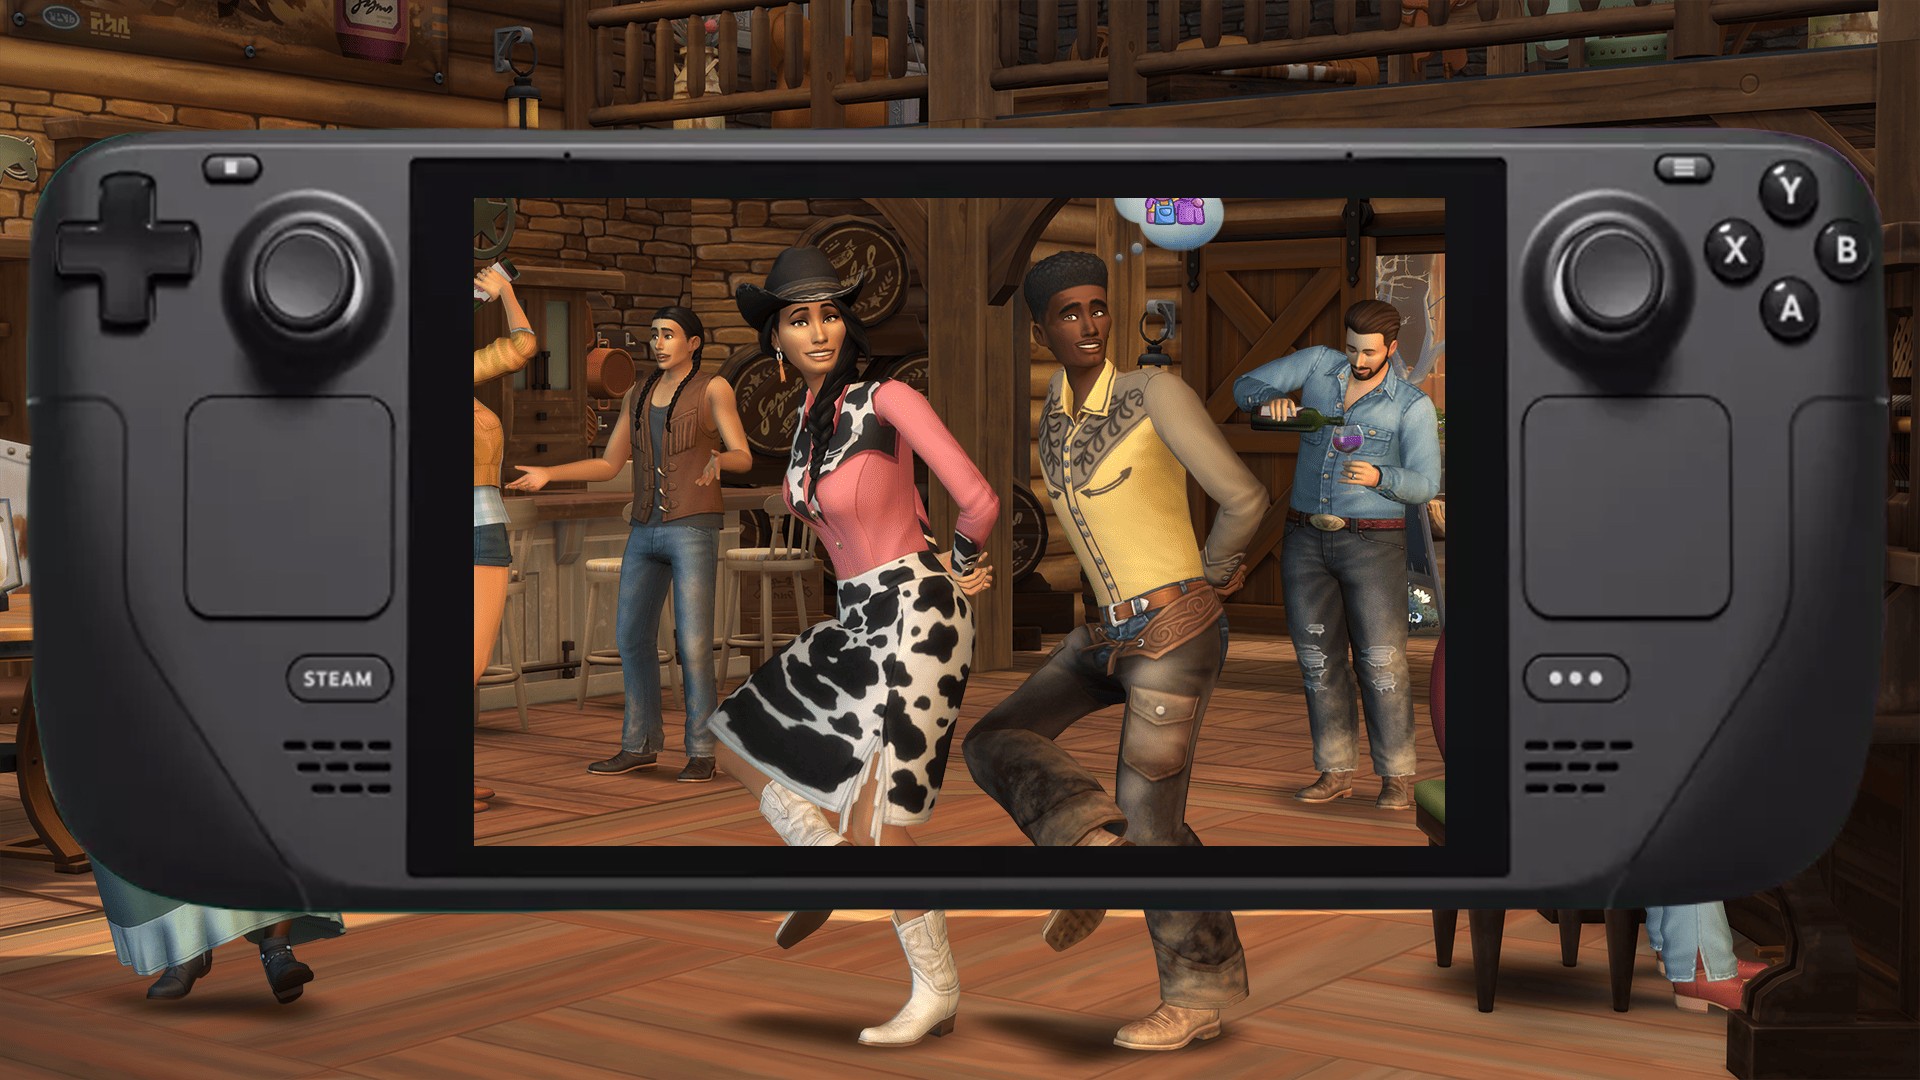 Is The Sims 4 Steam Deck compatible?